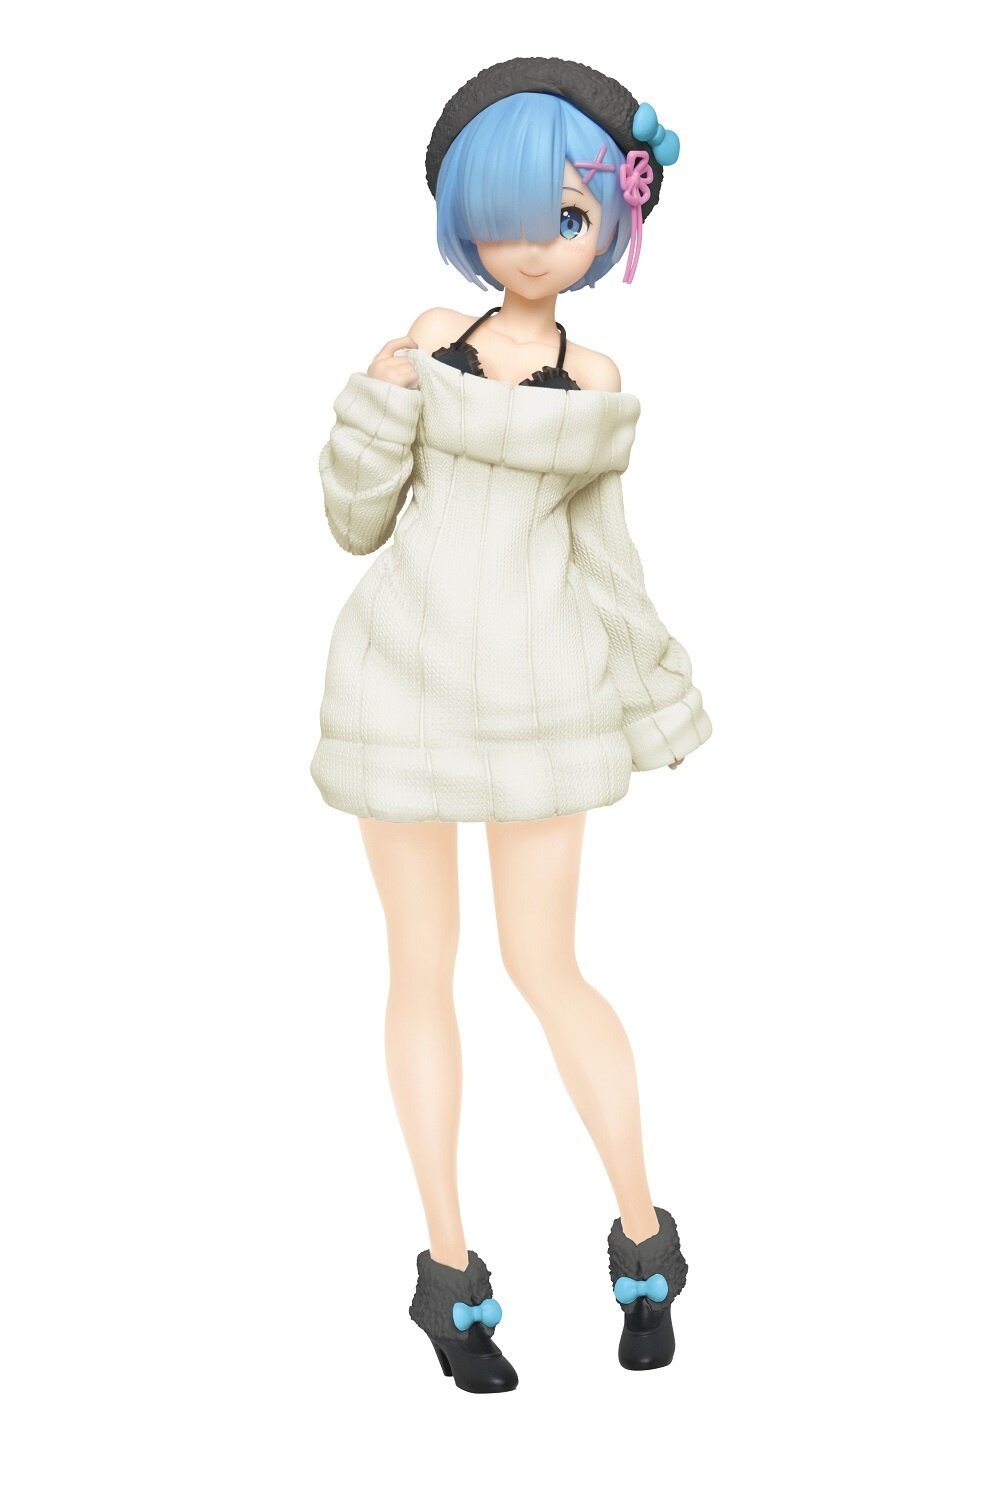 Precious Figure Re:Zero -Starting Life in Another World- Rem: Knit Dress  Renewal Ver.